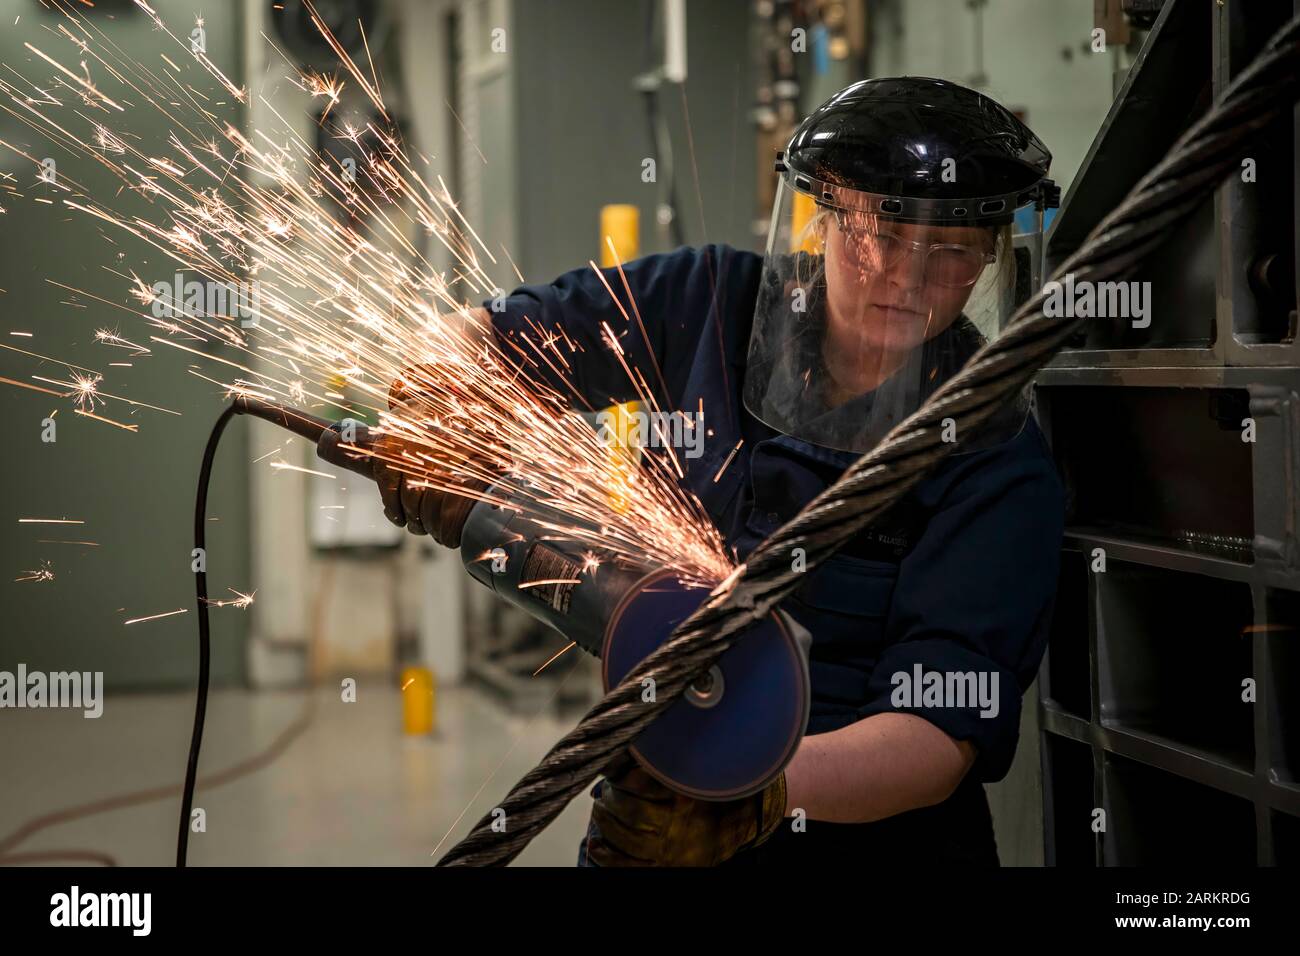 NORFOLK (Dec. 18, 2019) Airman Bella Villareal, from San Antonio, assigned to USS Gerald R. Ford's (CVN 78) air department, grinds down a weld on an arresting gear cable during a cable re-reave evolution. Ford is currently in port after completing a successful independent steaming exercise. (U.S. Navy photo by Mass Communication Specialist 3rd Class Joshua Murray) Stock Photo